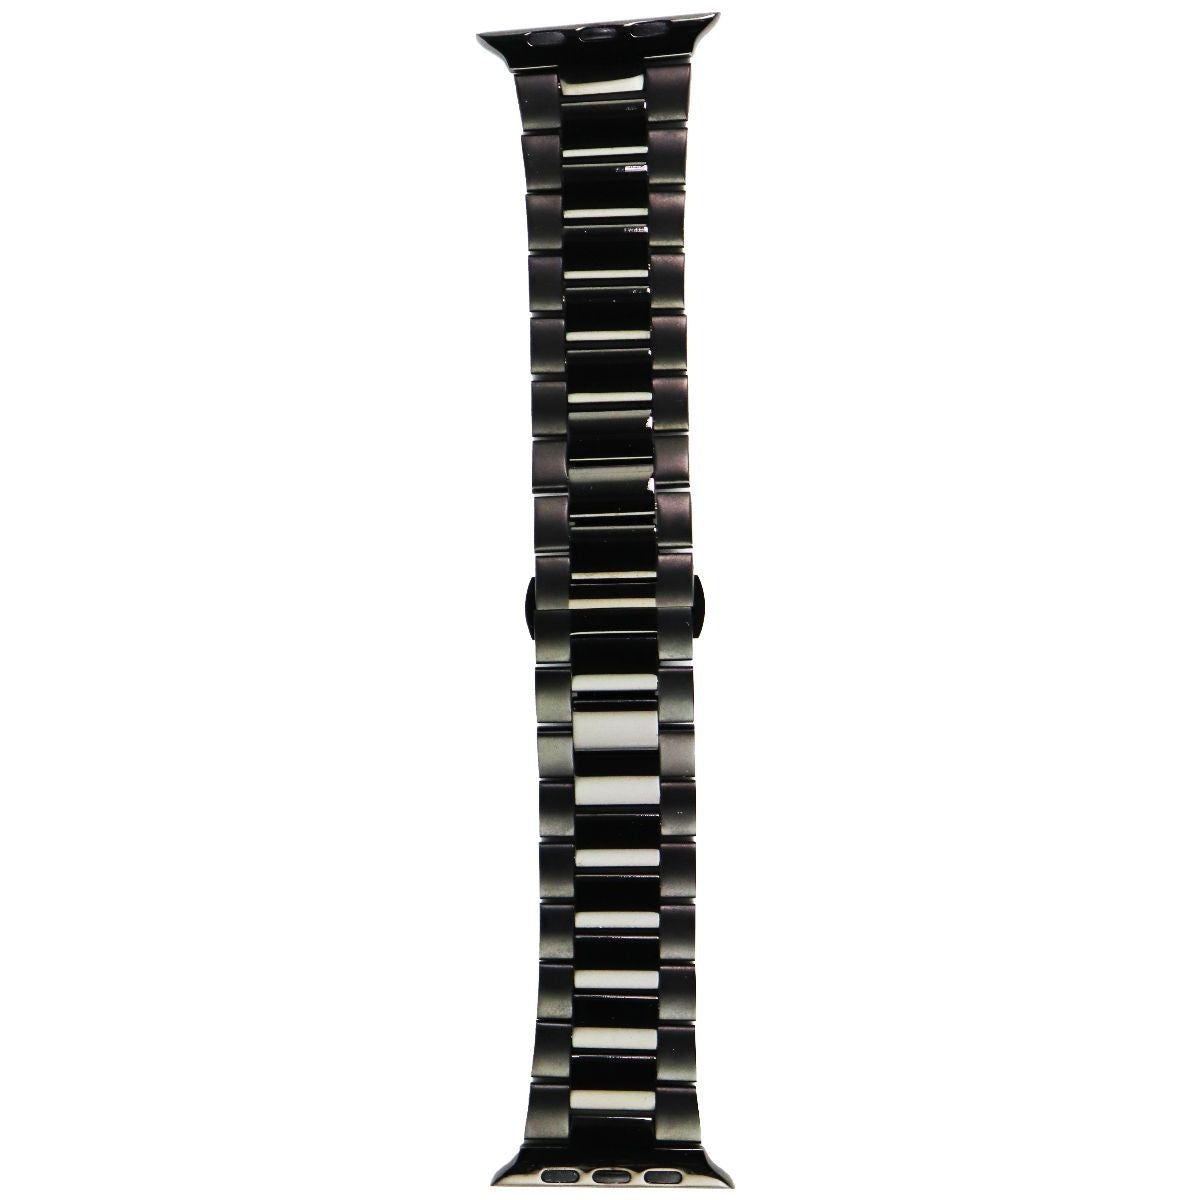 Case-Mate Metal Linked Watch Band for Apple Watch (All Series / 42-44mm) - Black